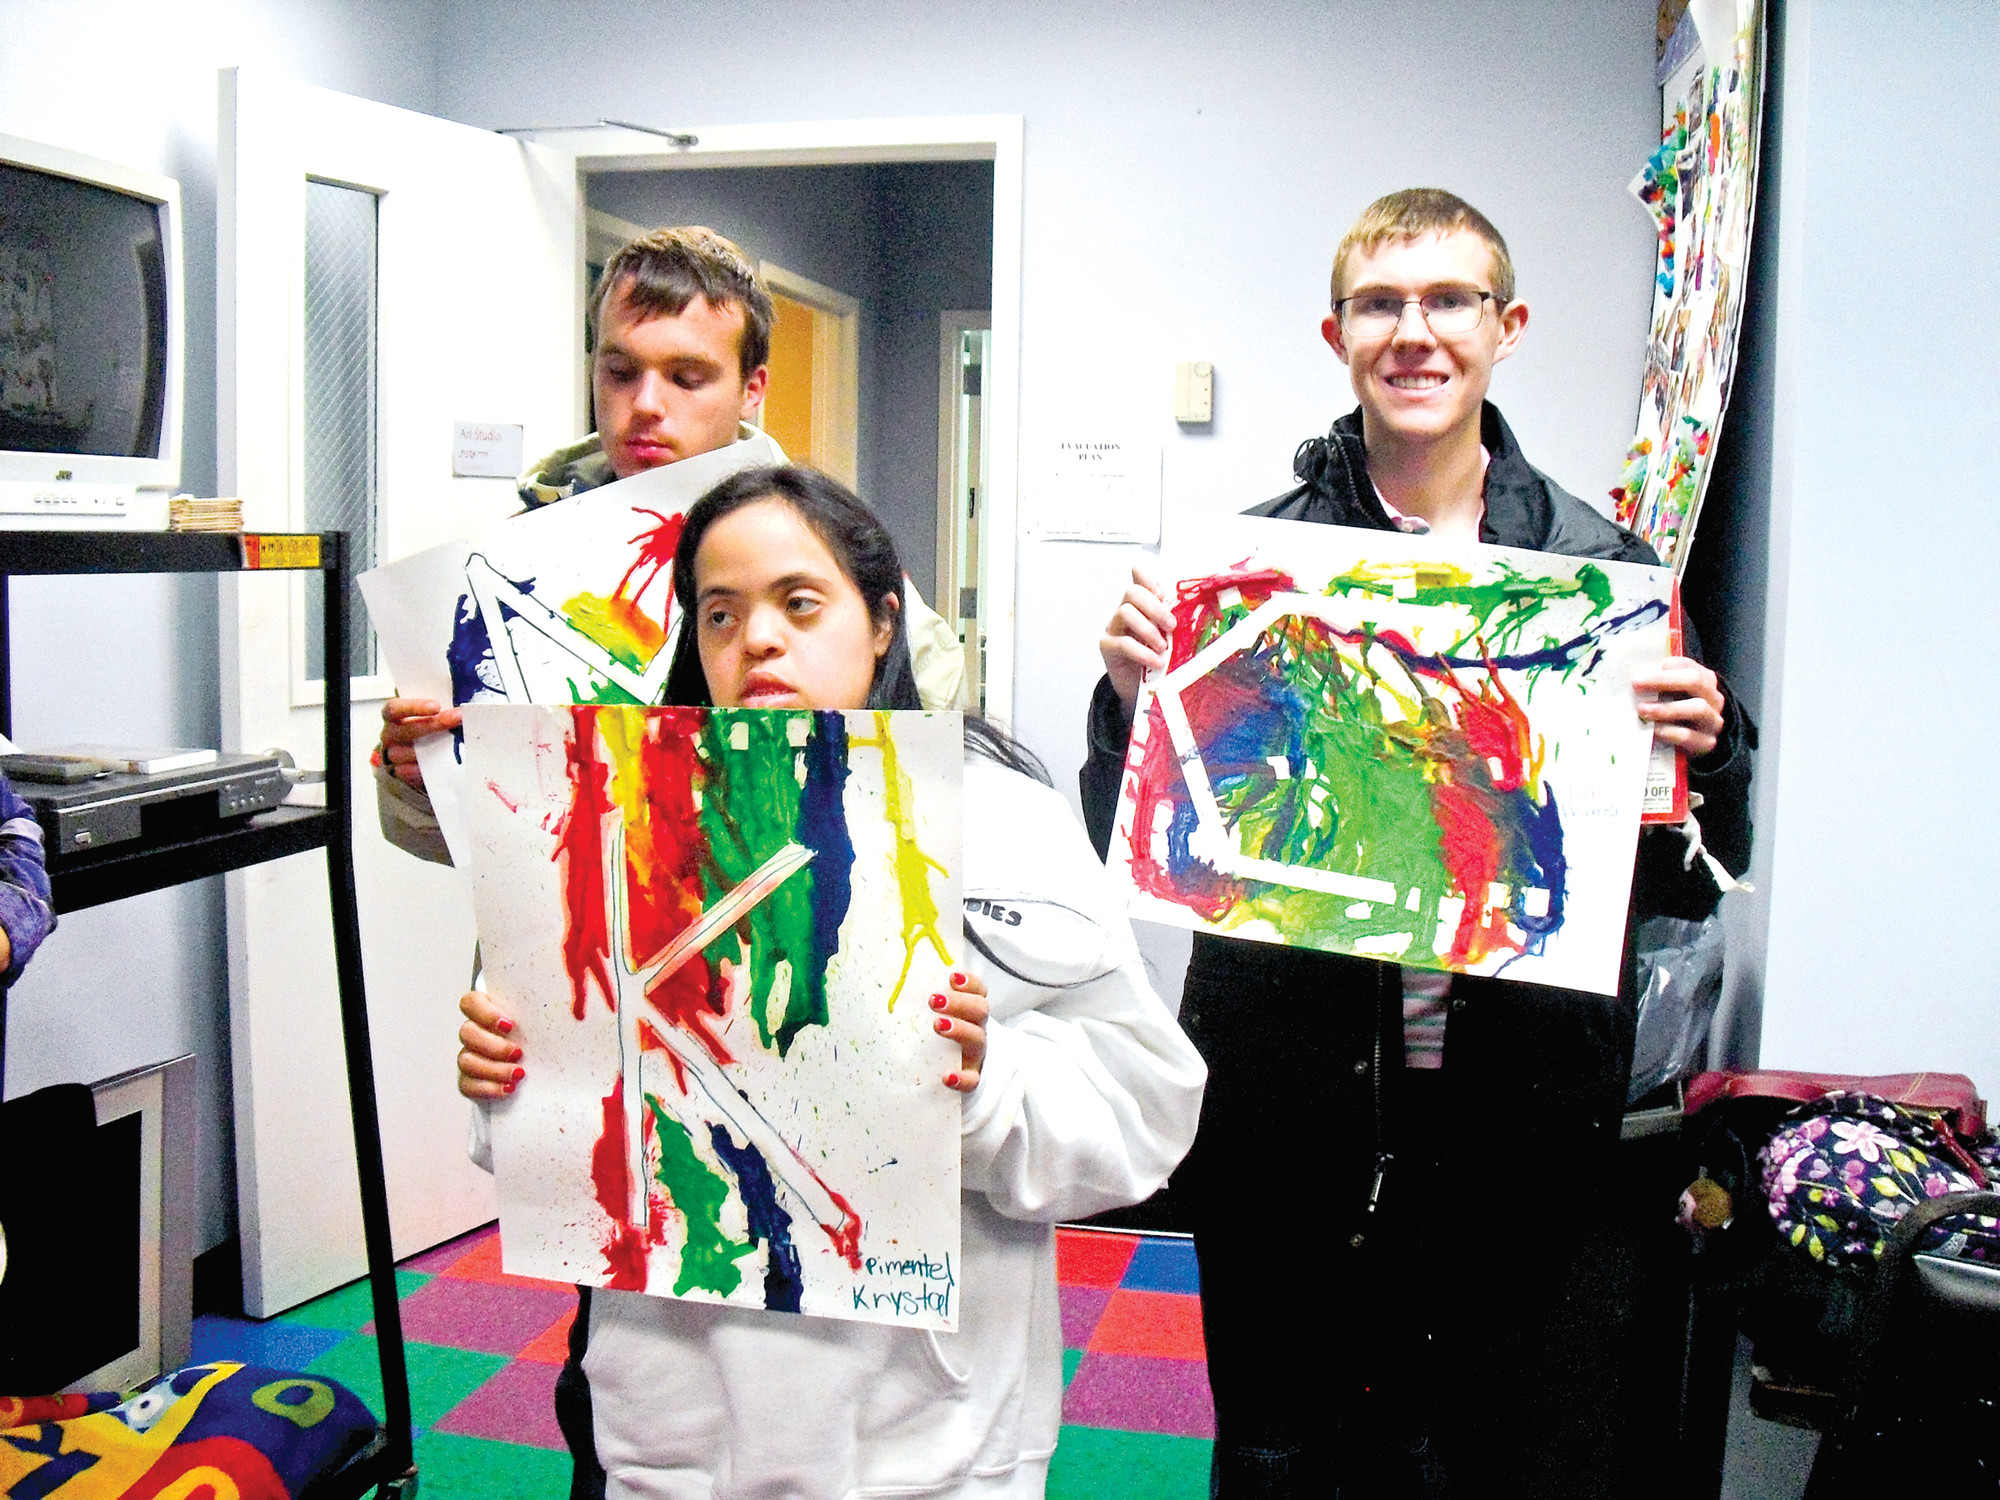 Max McCarthy, Krystal Pimentel and Charlie Butler pose with their finished artwork.